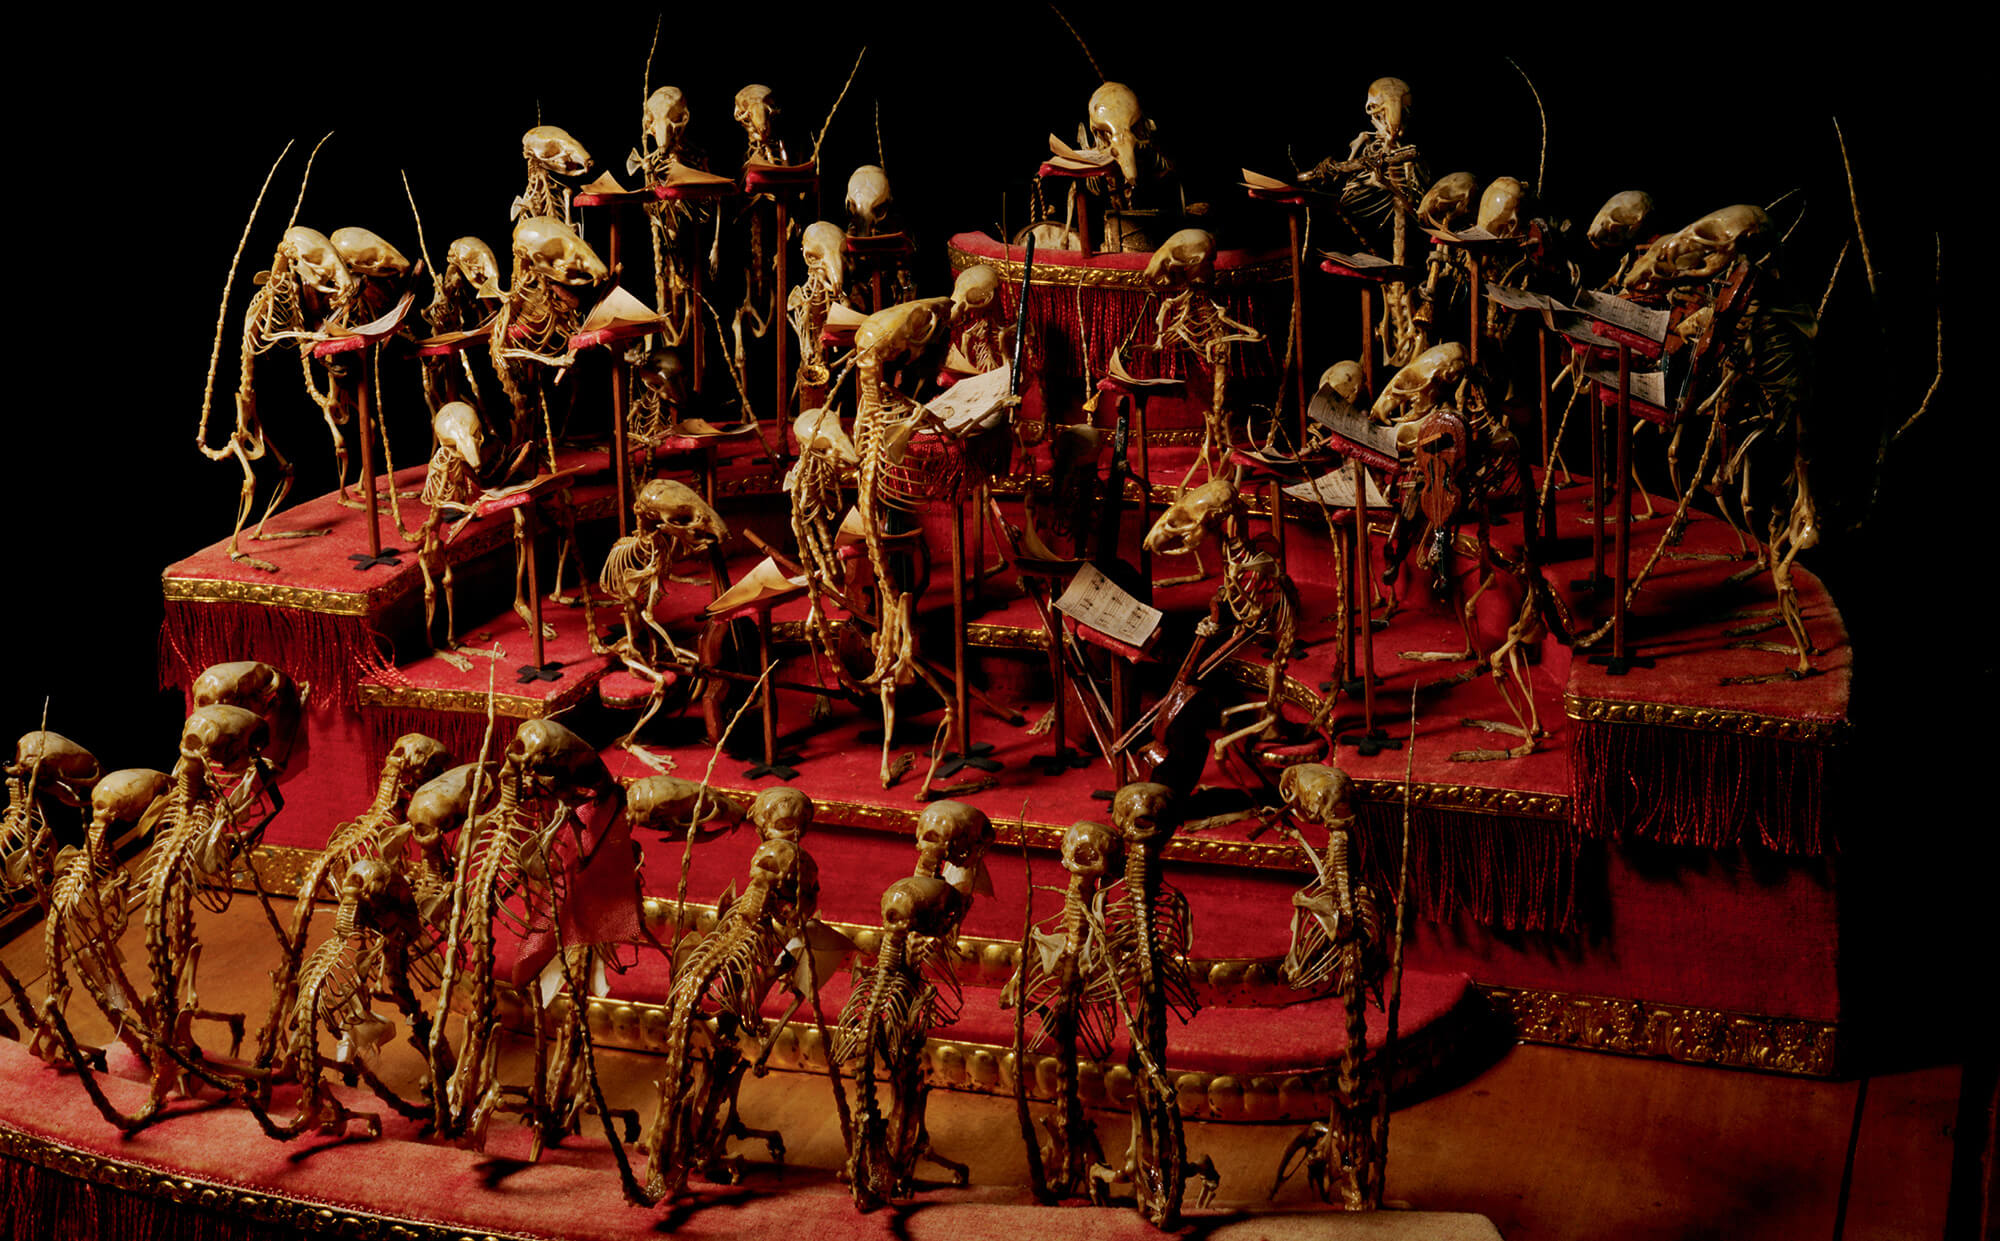 A photograph by Lena Herzog of fifty mice skeletons arrayed as a performing orchestra and attentive audience.